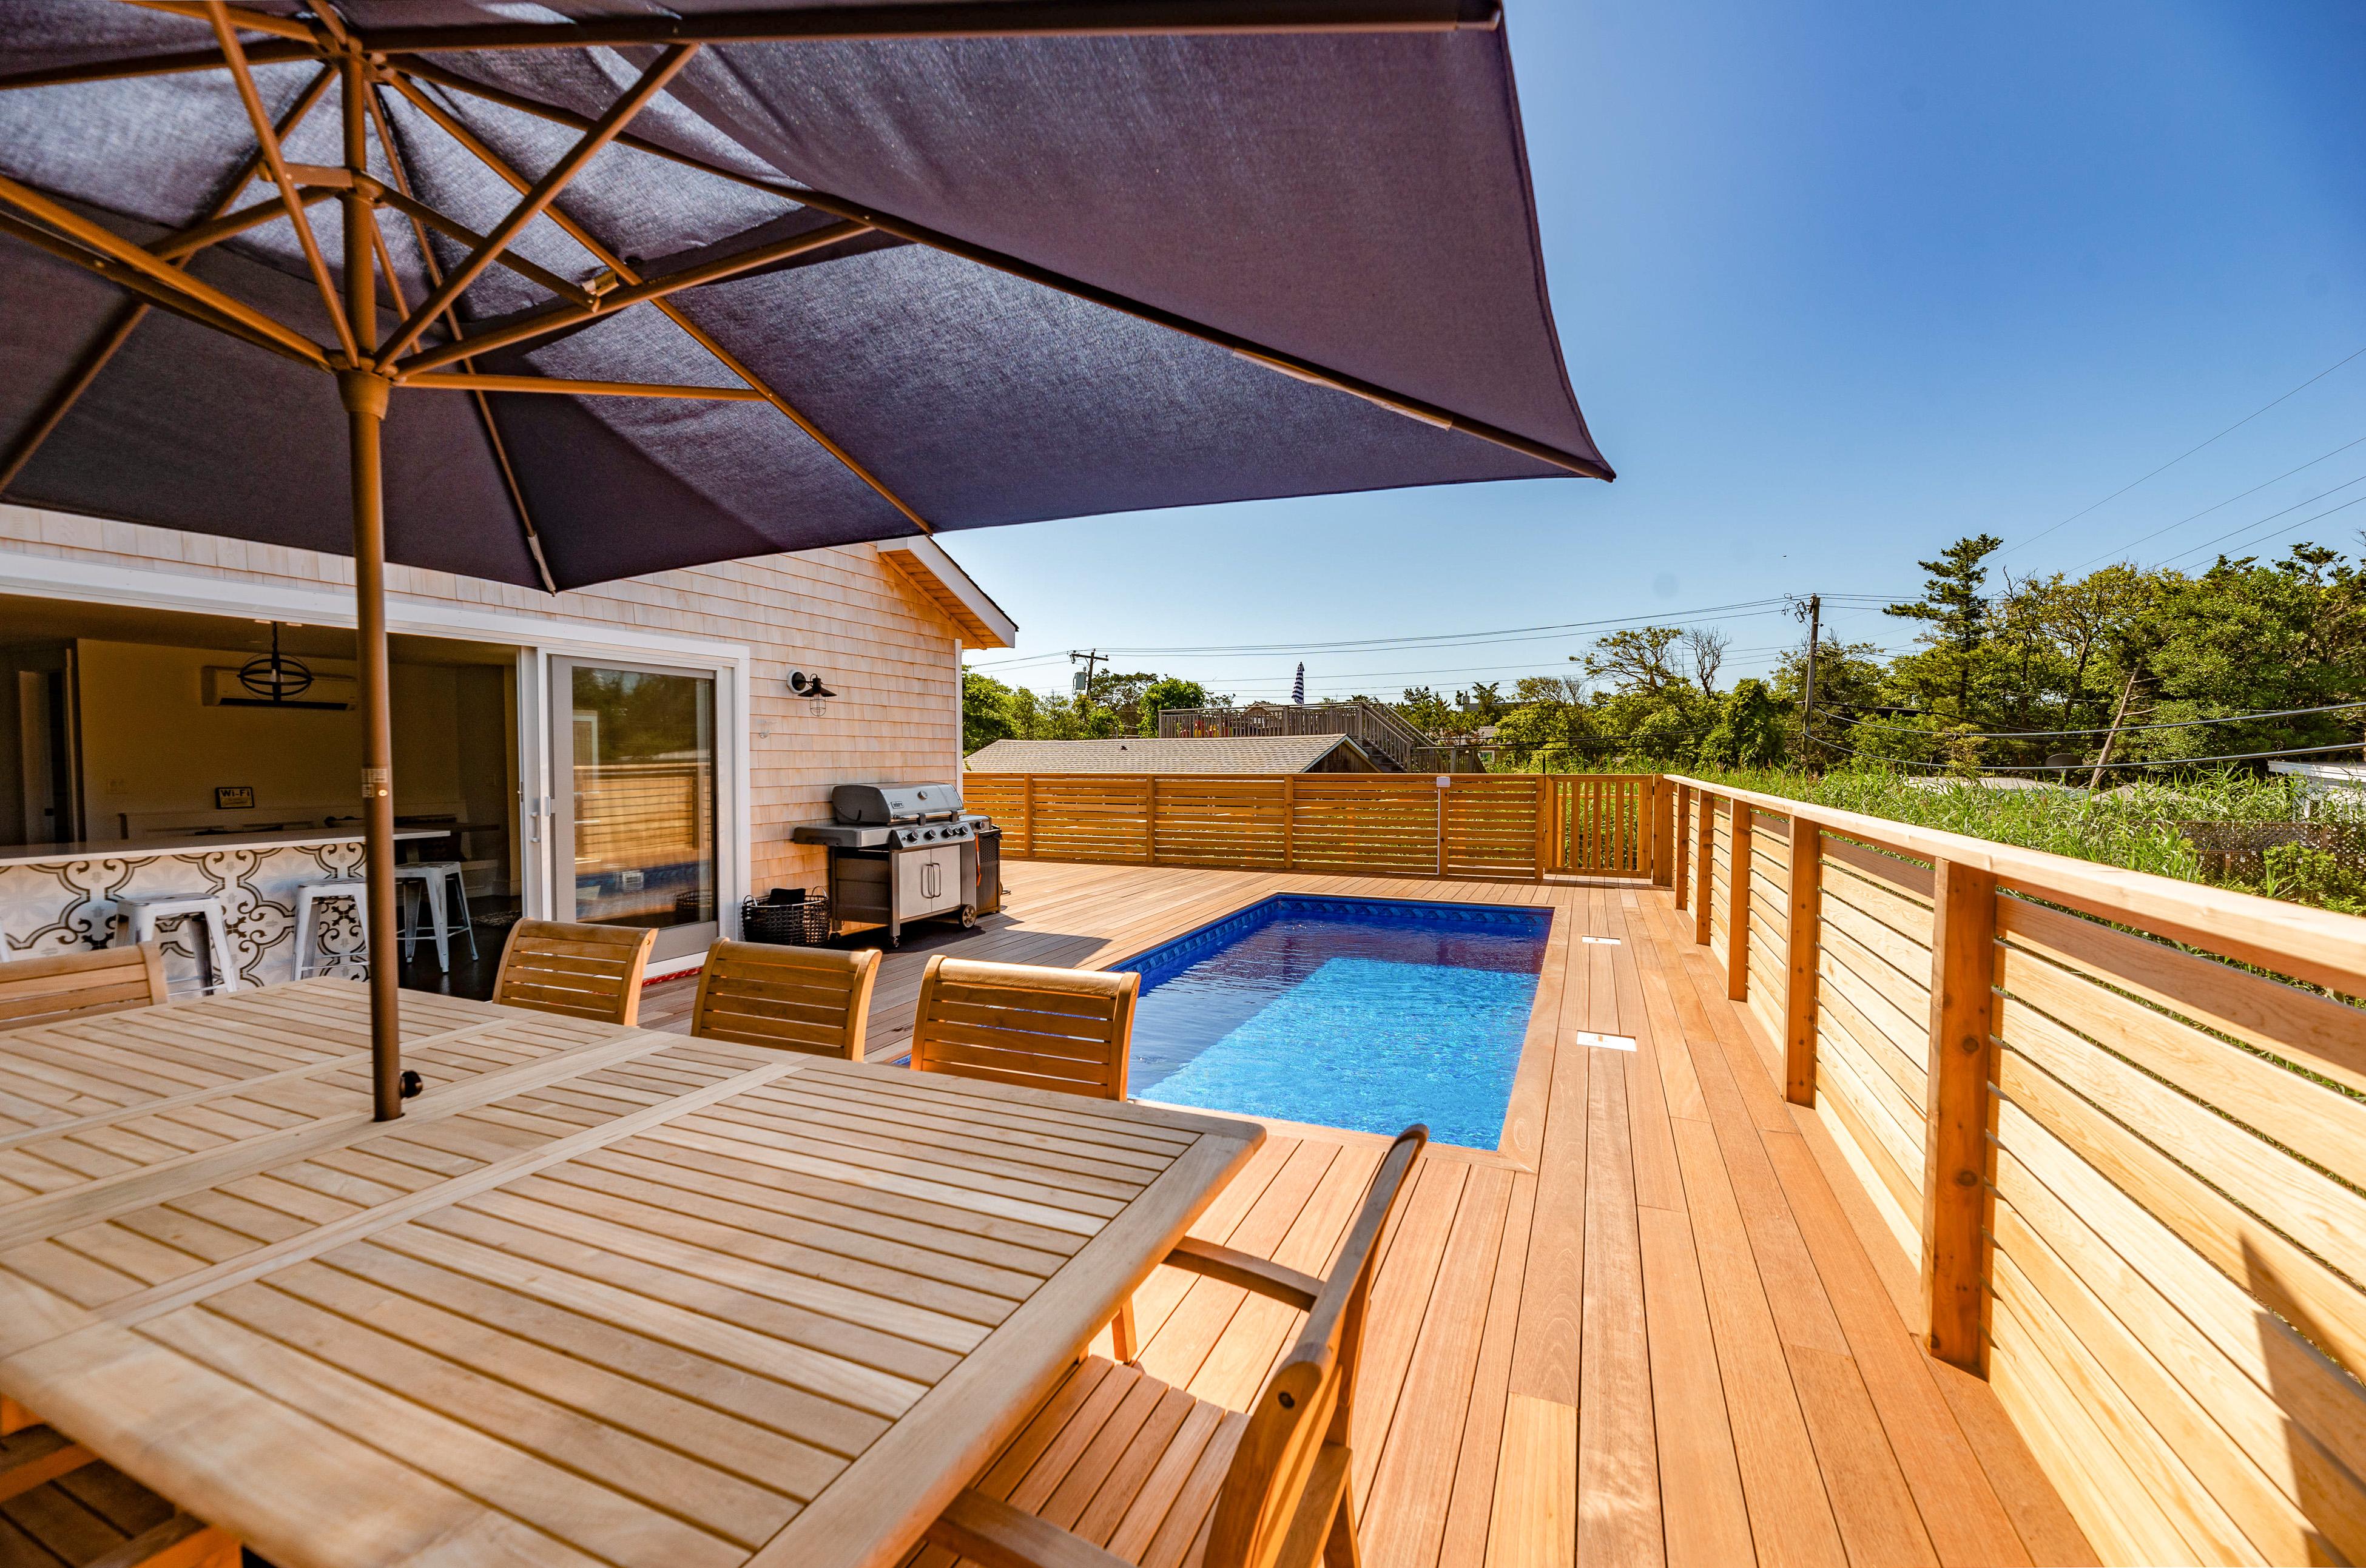 Property Image 1 - Poolside Chic by the Sea